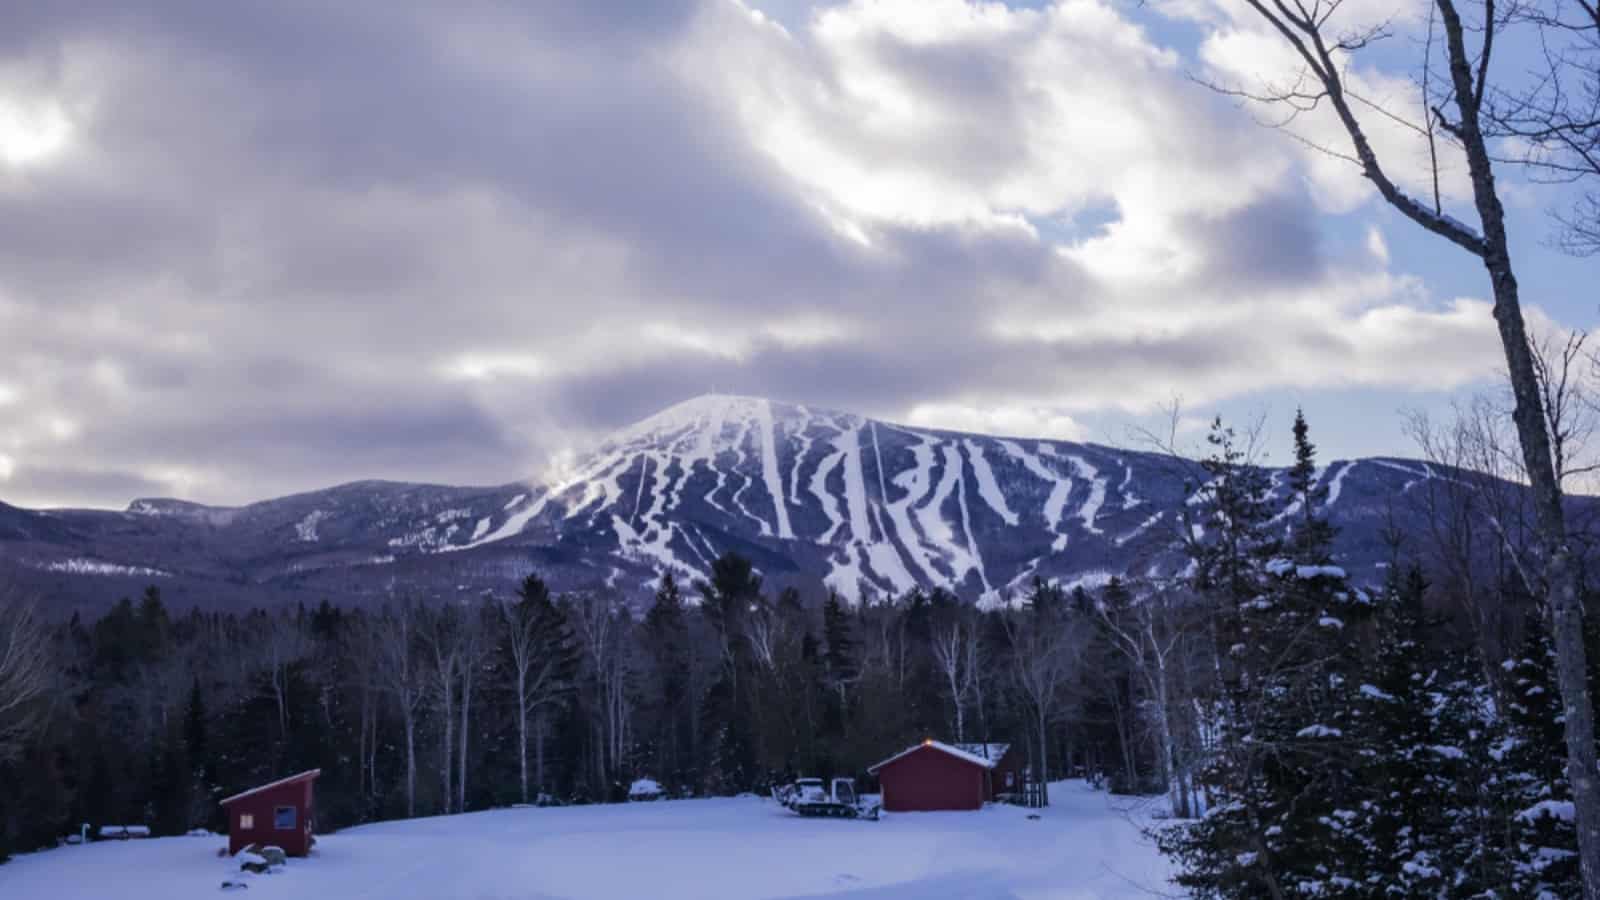 Carrabassett Valley, Maine / USA - January 7 2020: Dramatic clouds light up the slopes at Sugarloaf ski resort in western Maine. Photographed from the race trail at the Outdoor Center.